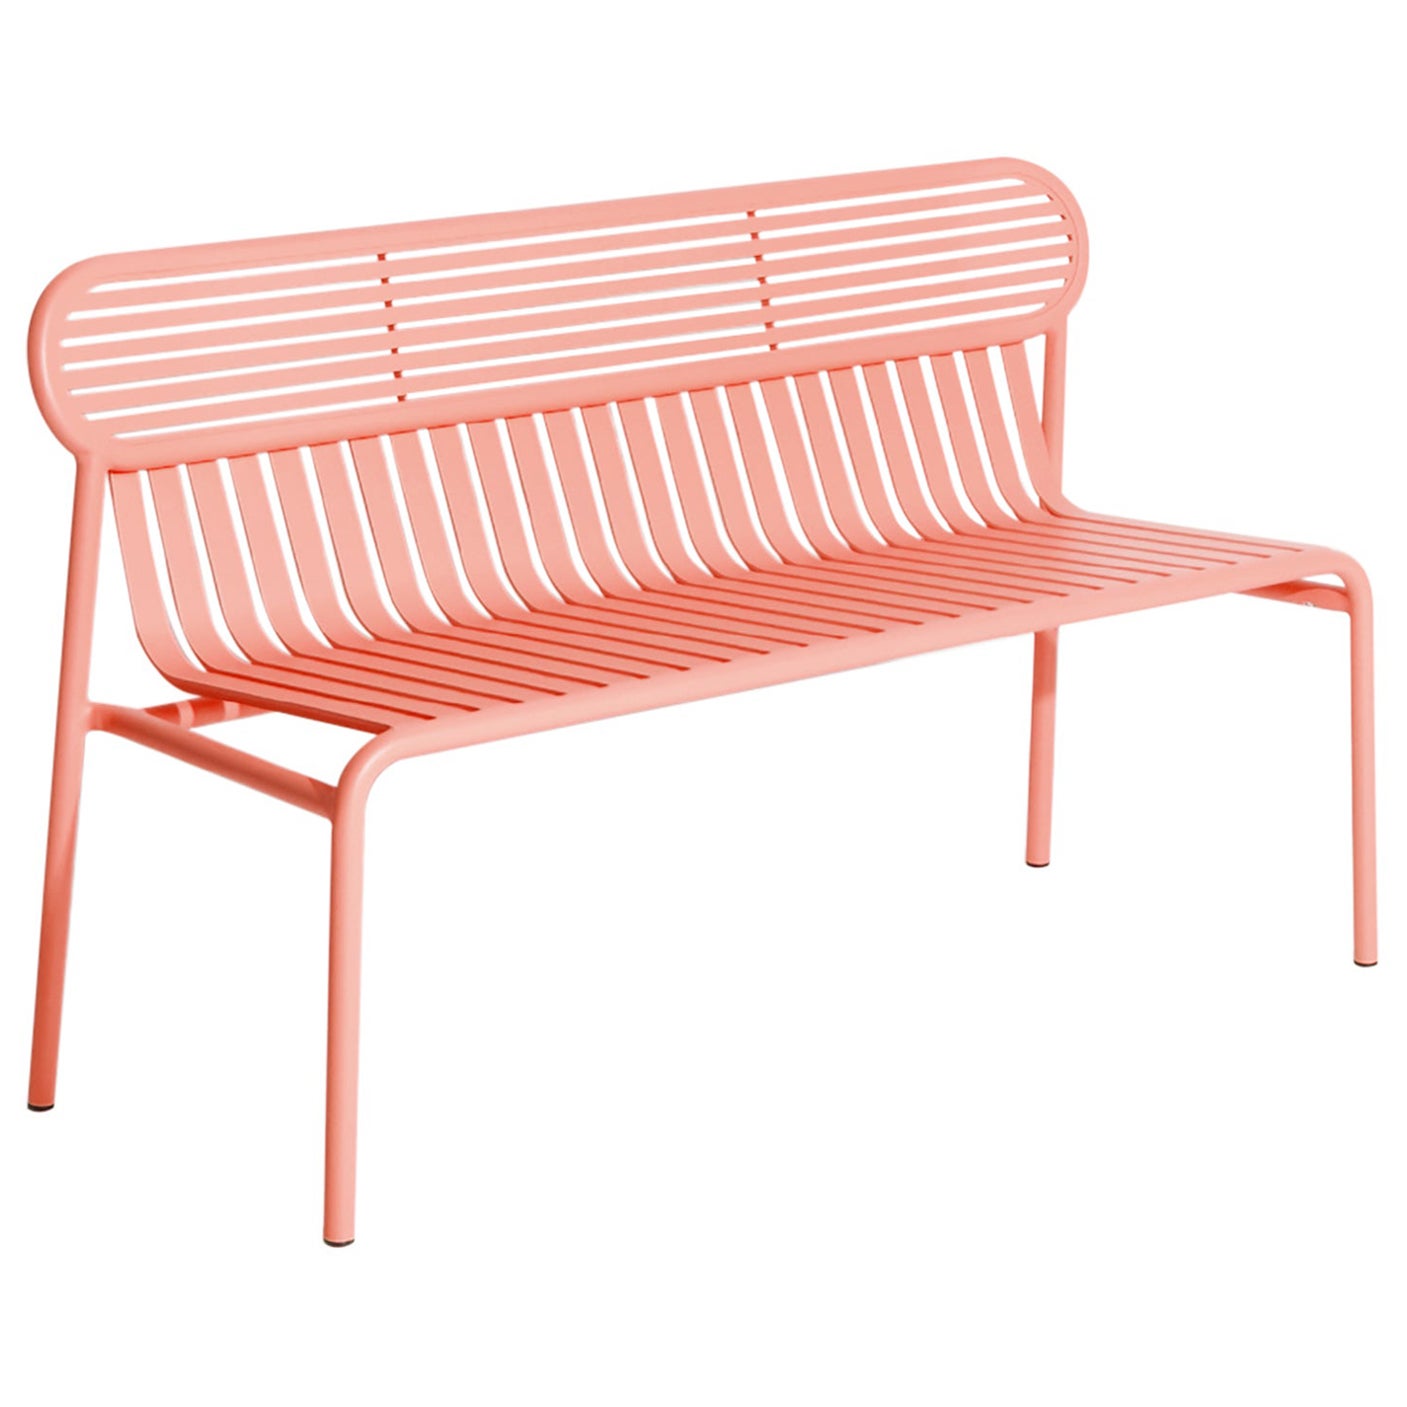 Petite Friture Week-End Bench in Coral Aluminium by Studio BrichetZiegler For Sale